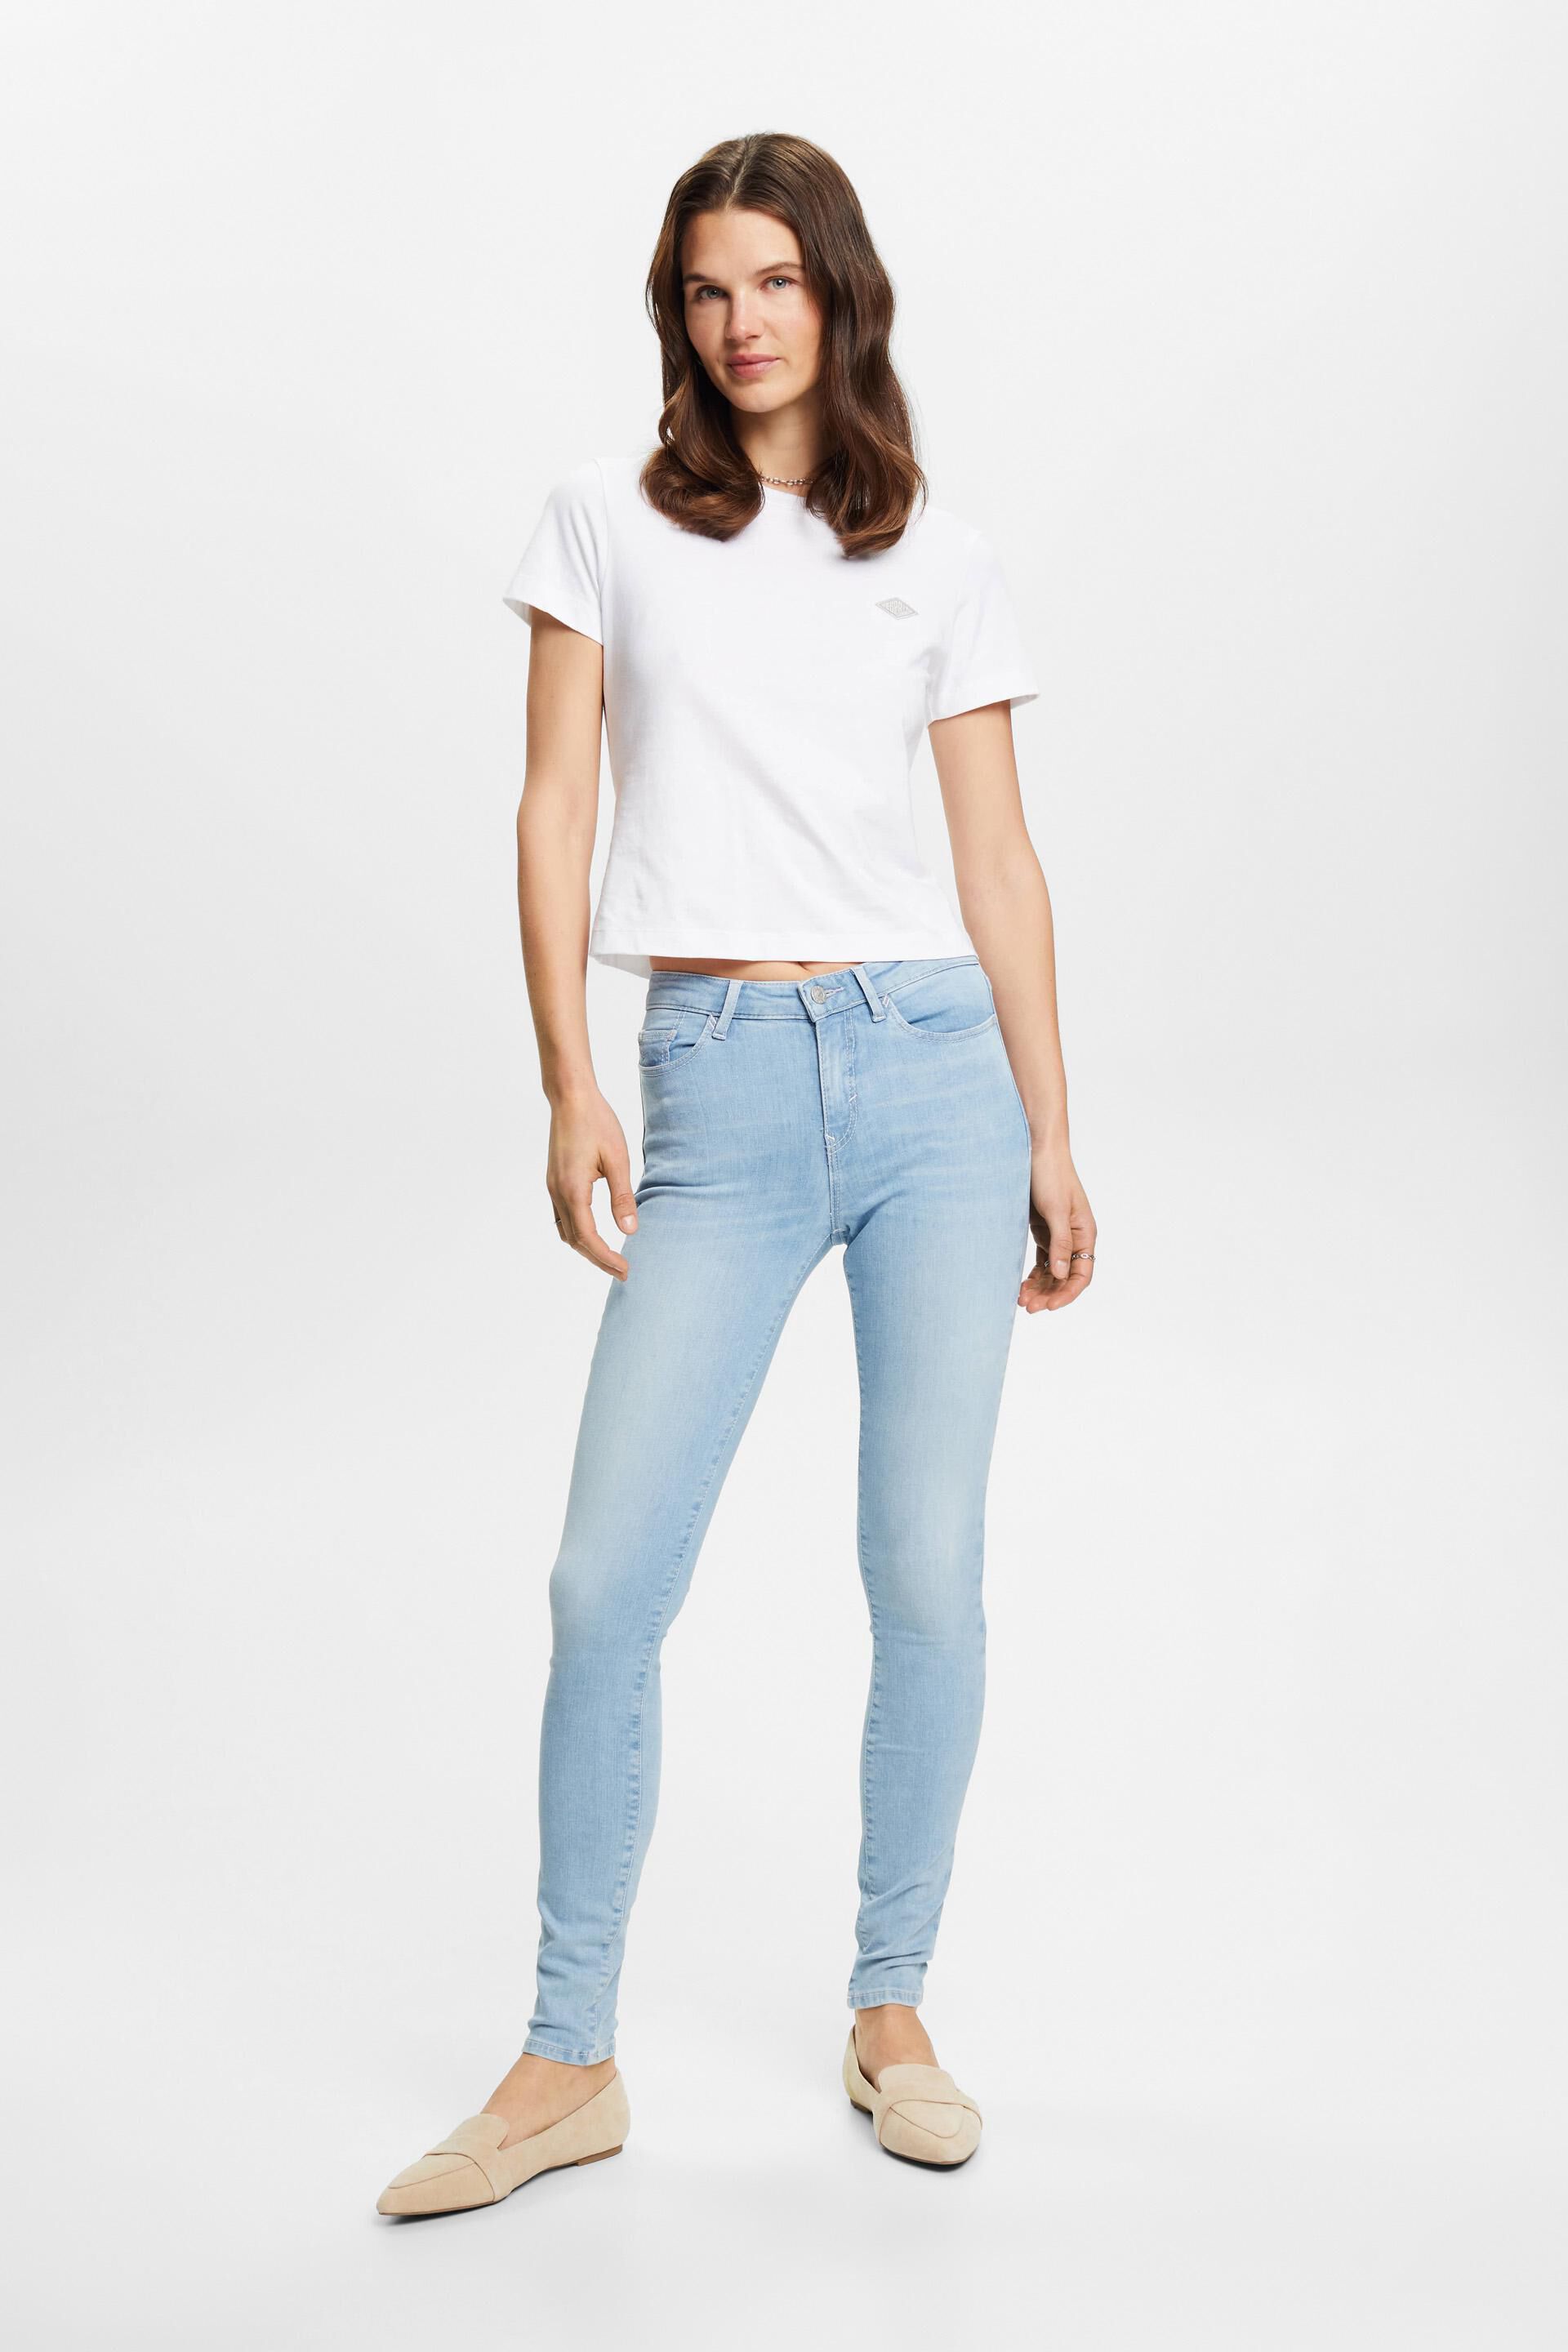 ESPRIT - Skinny jeans of sustainable cotton at our online shop